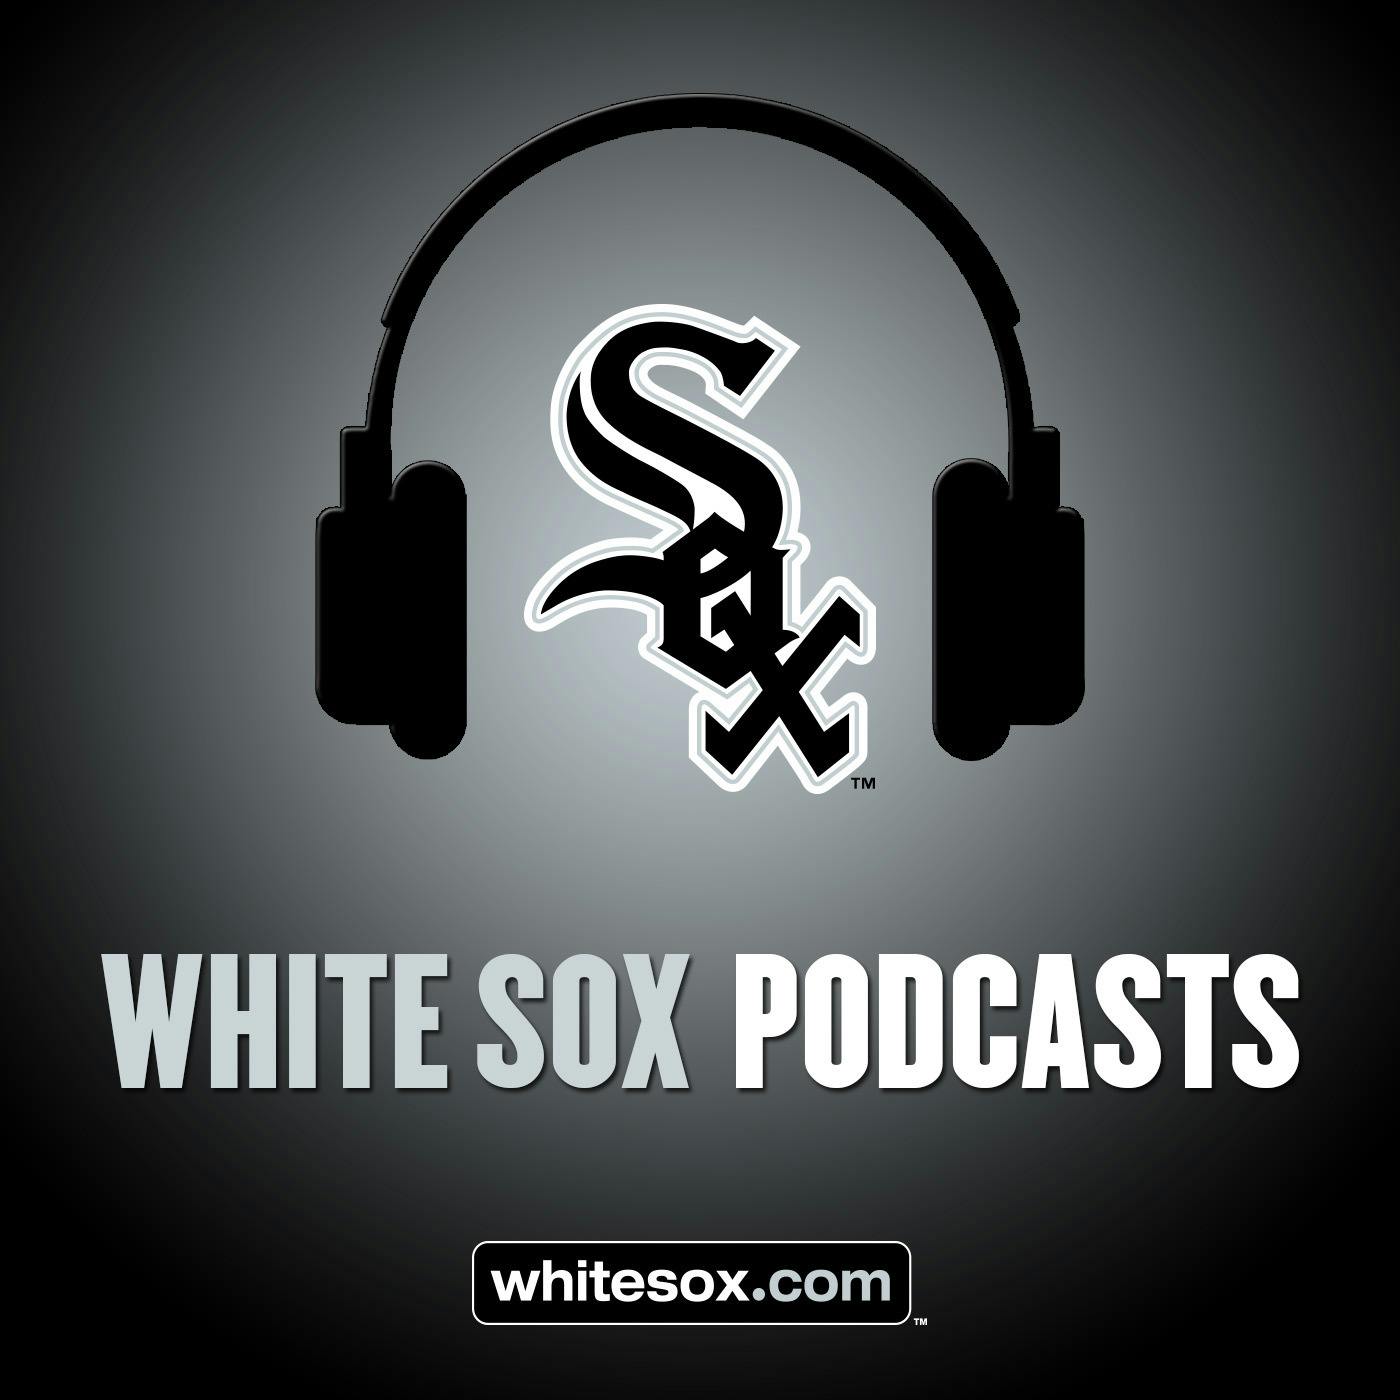 8/17/19: White Sox Weekly